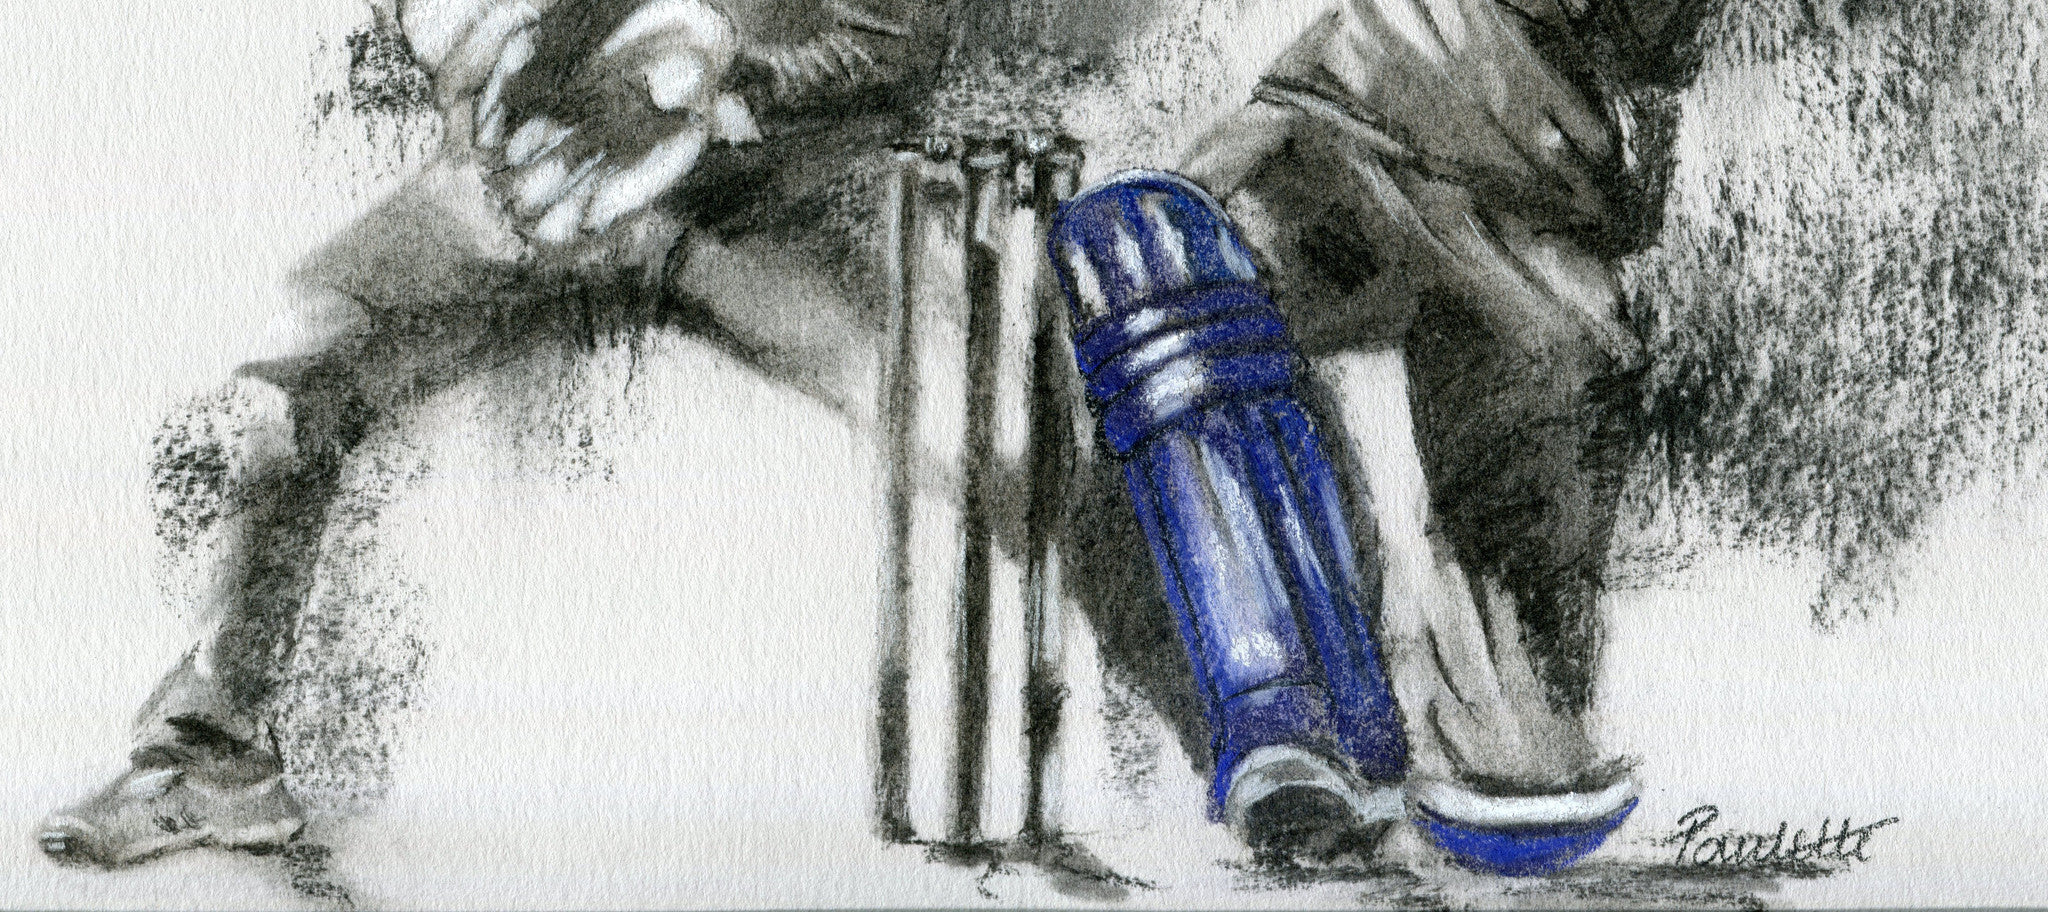 close up detail of a cricket drawing in charcoal by cricket artist showing batsman legs and pads in a t20 match